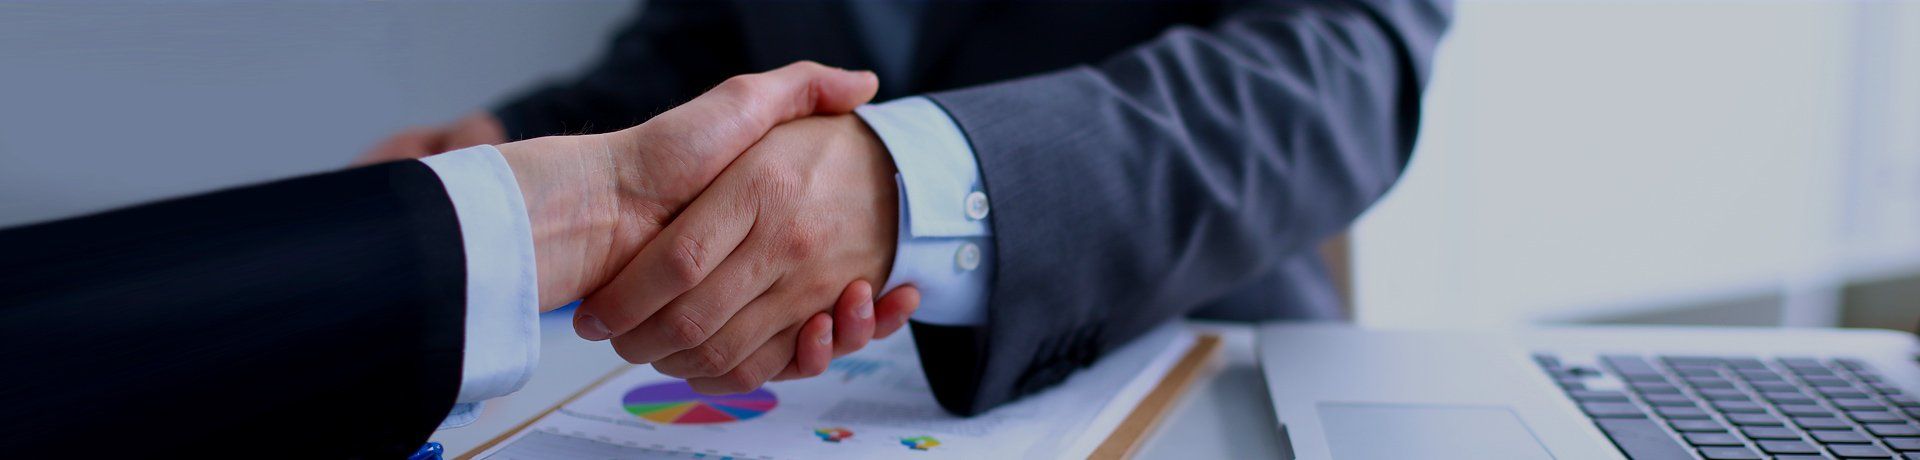 accountant shaking hands with customer